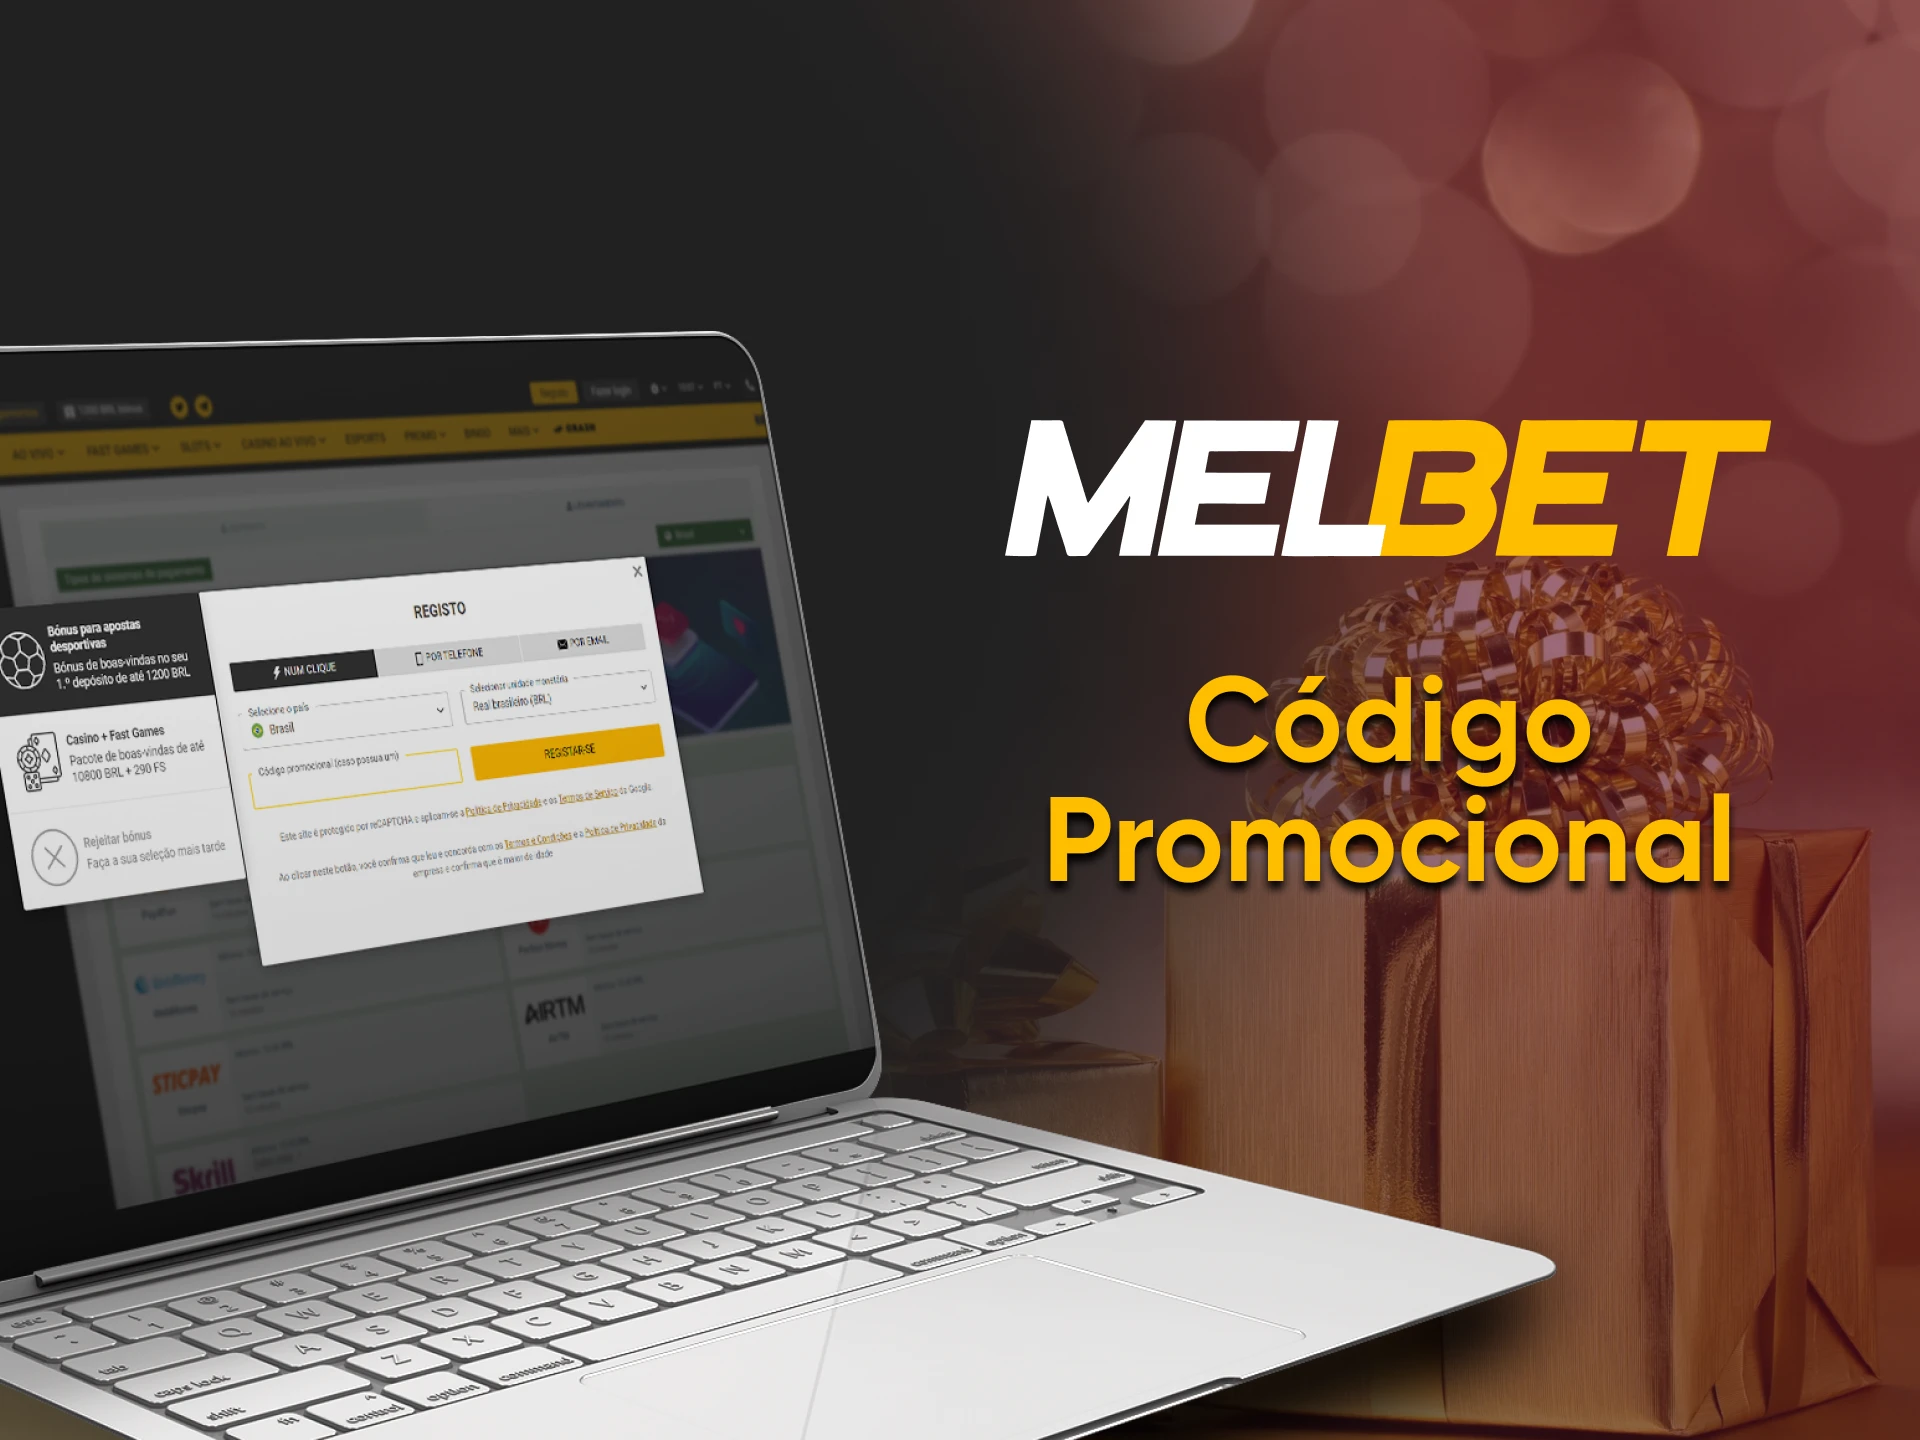 Receive a welcome bonus by entering the Melbet promo code.